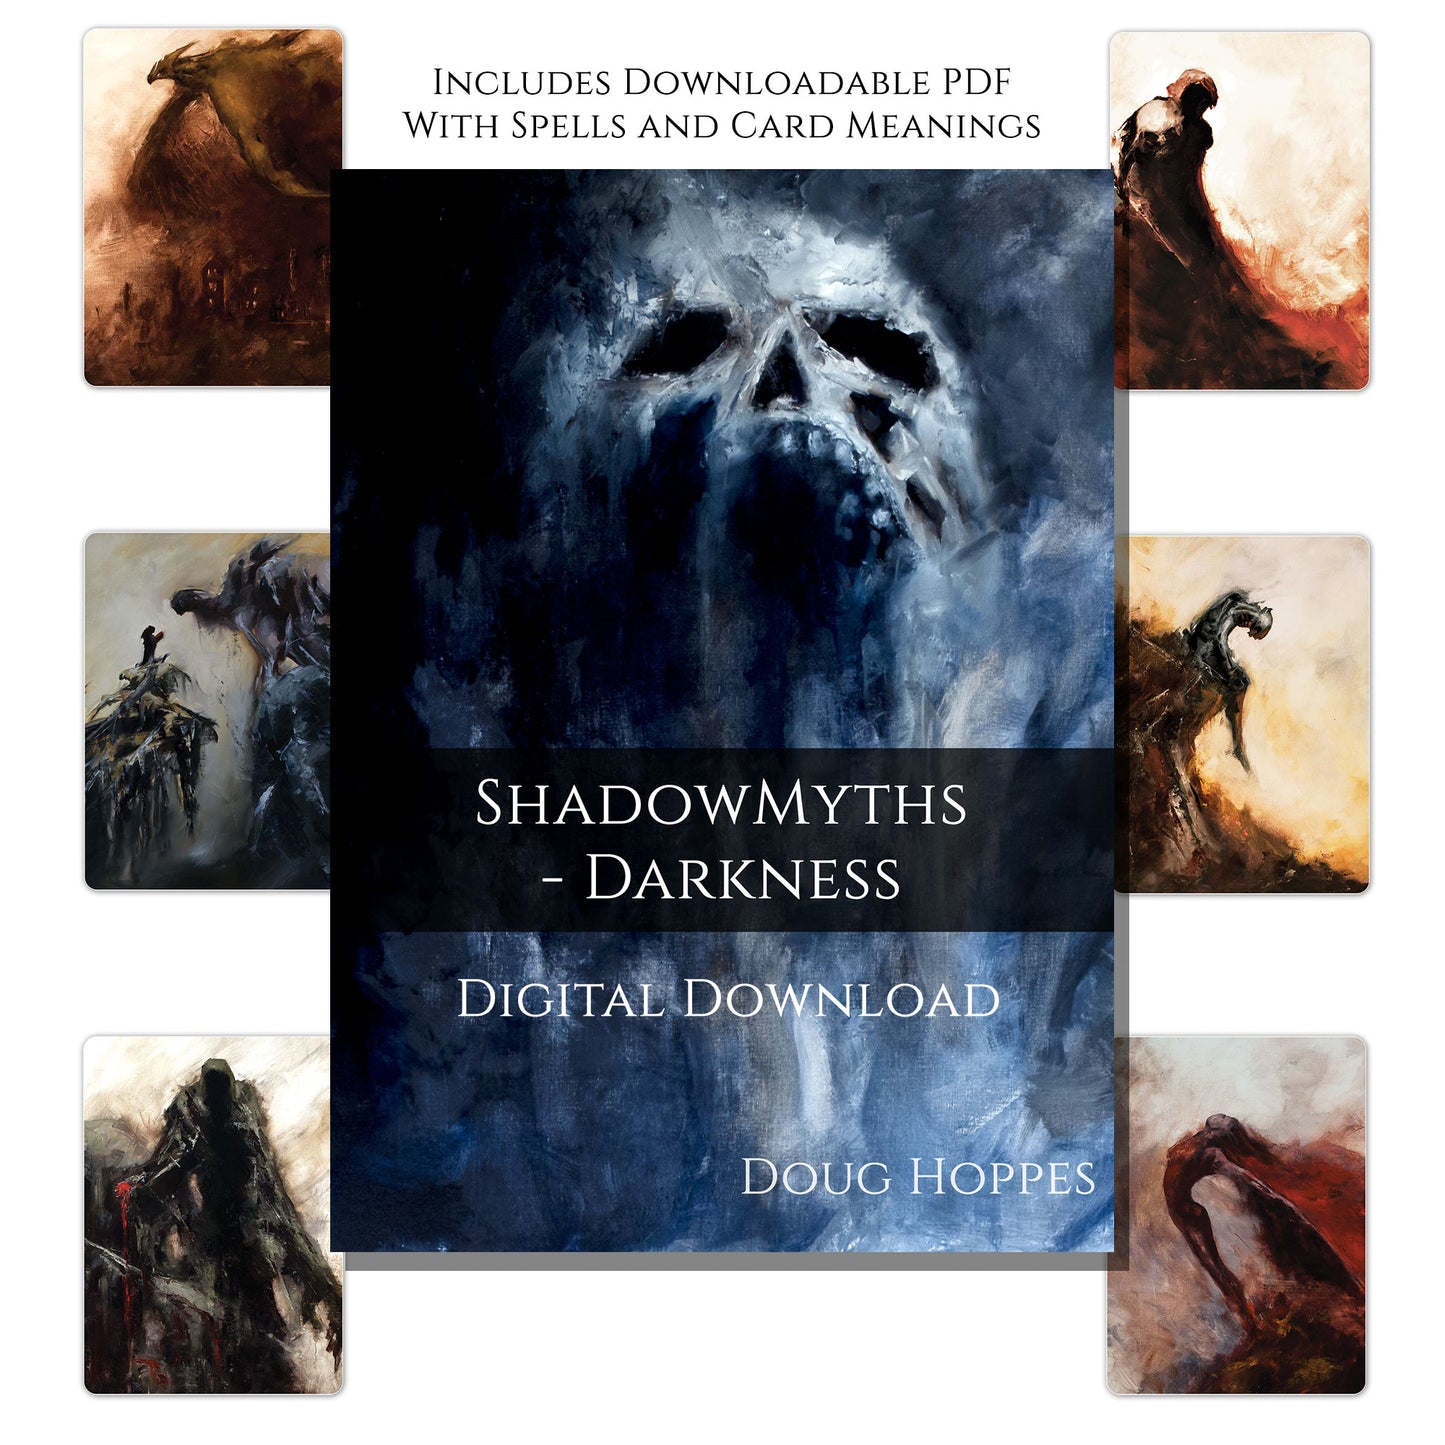 Darkness Deck with Downloadable Content Used for Oracle Reading, Dungeons and Dragons and Story Ideas